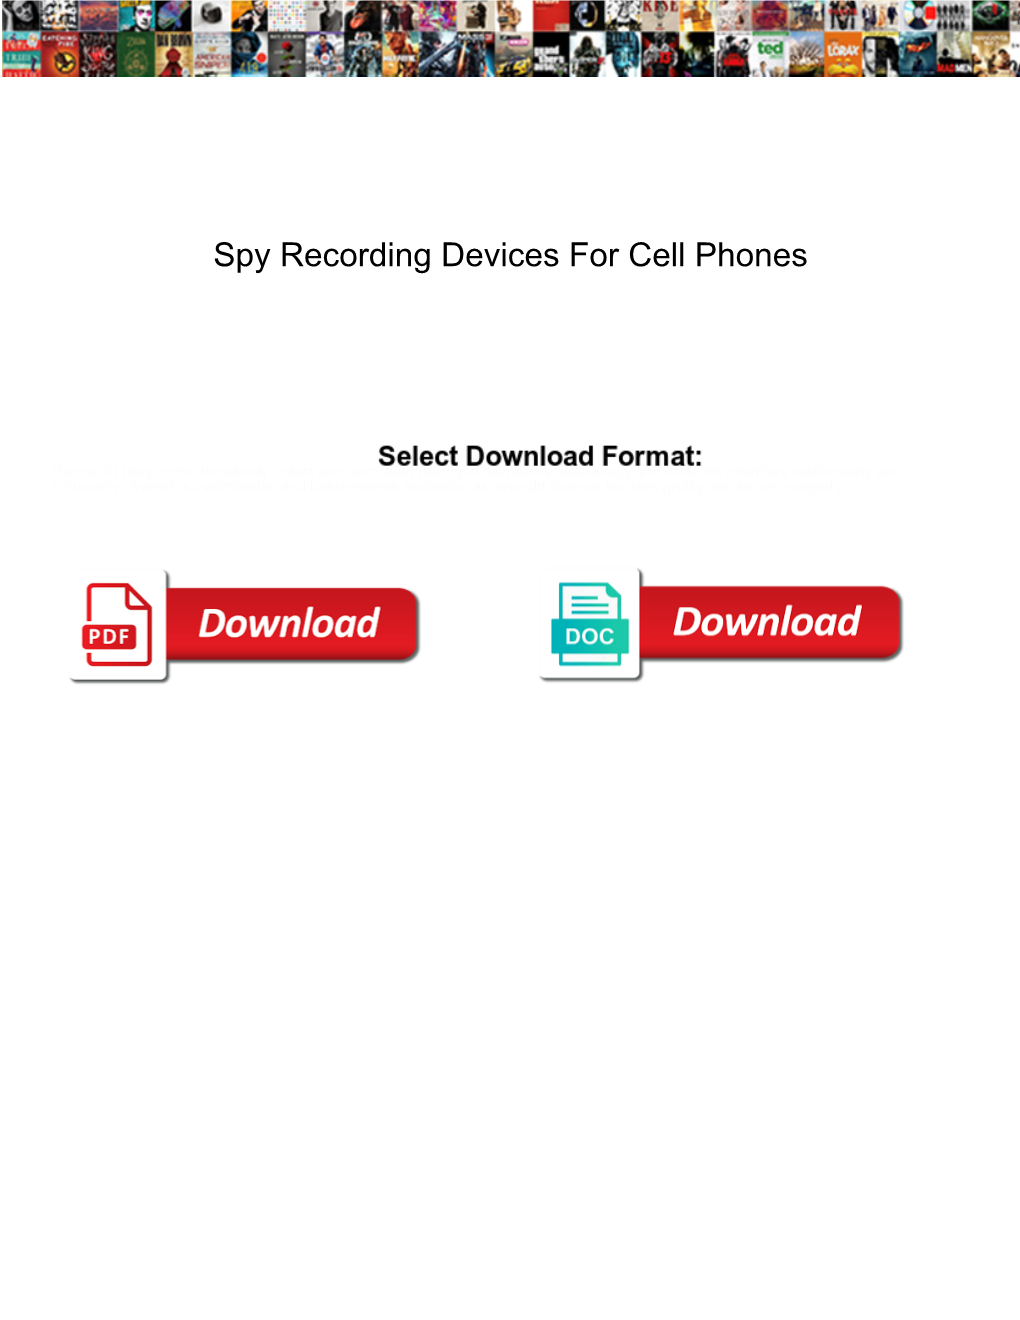 Spy Recording Devices for Cell Phones